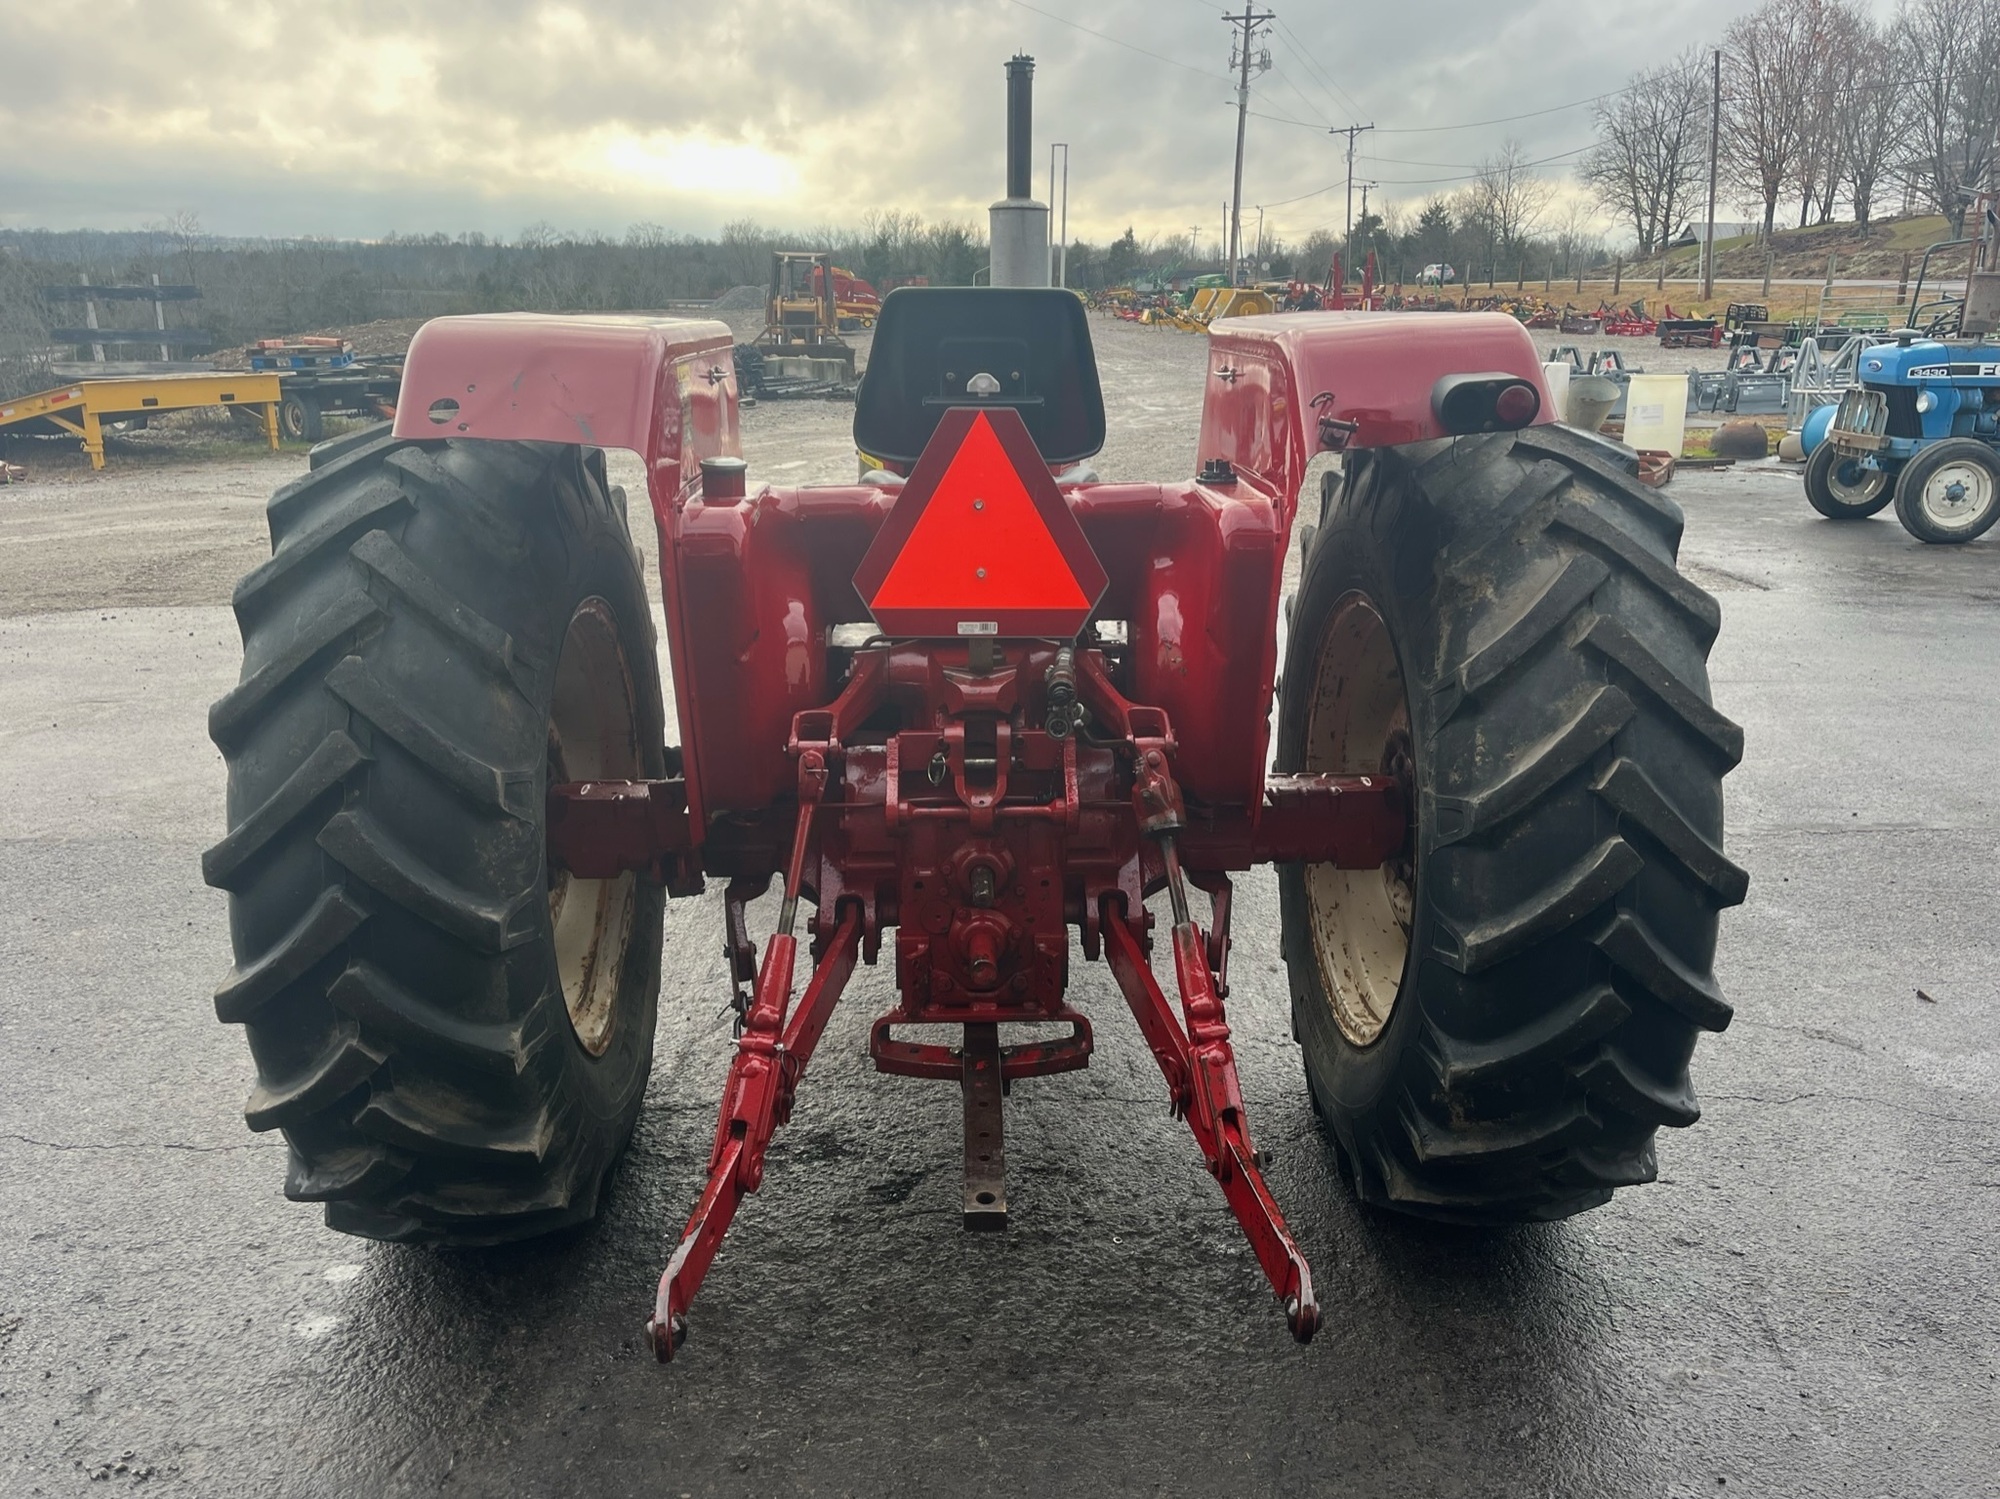 1977 International Harvester 674 Agricultural Tractors | County Equipment Company LLC